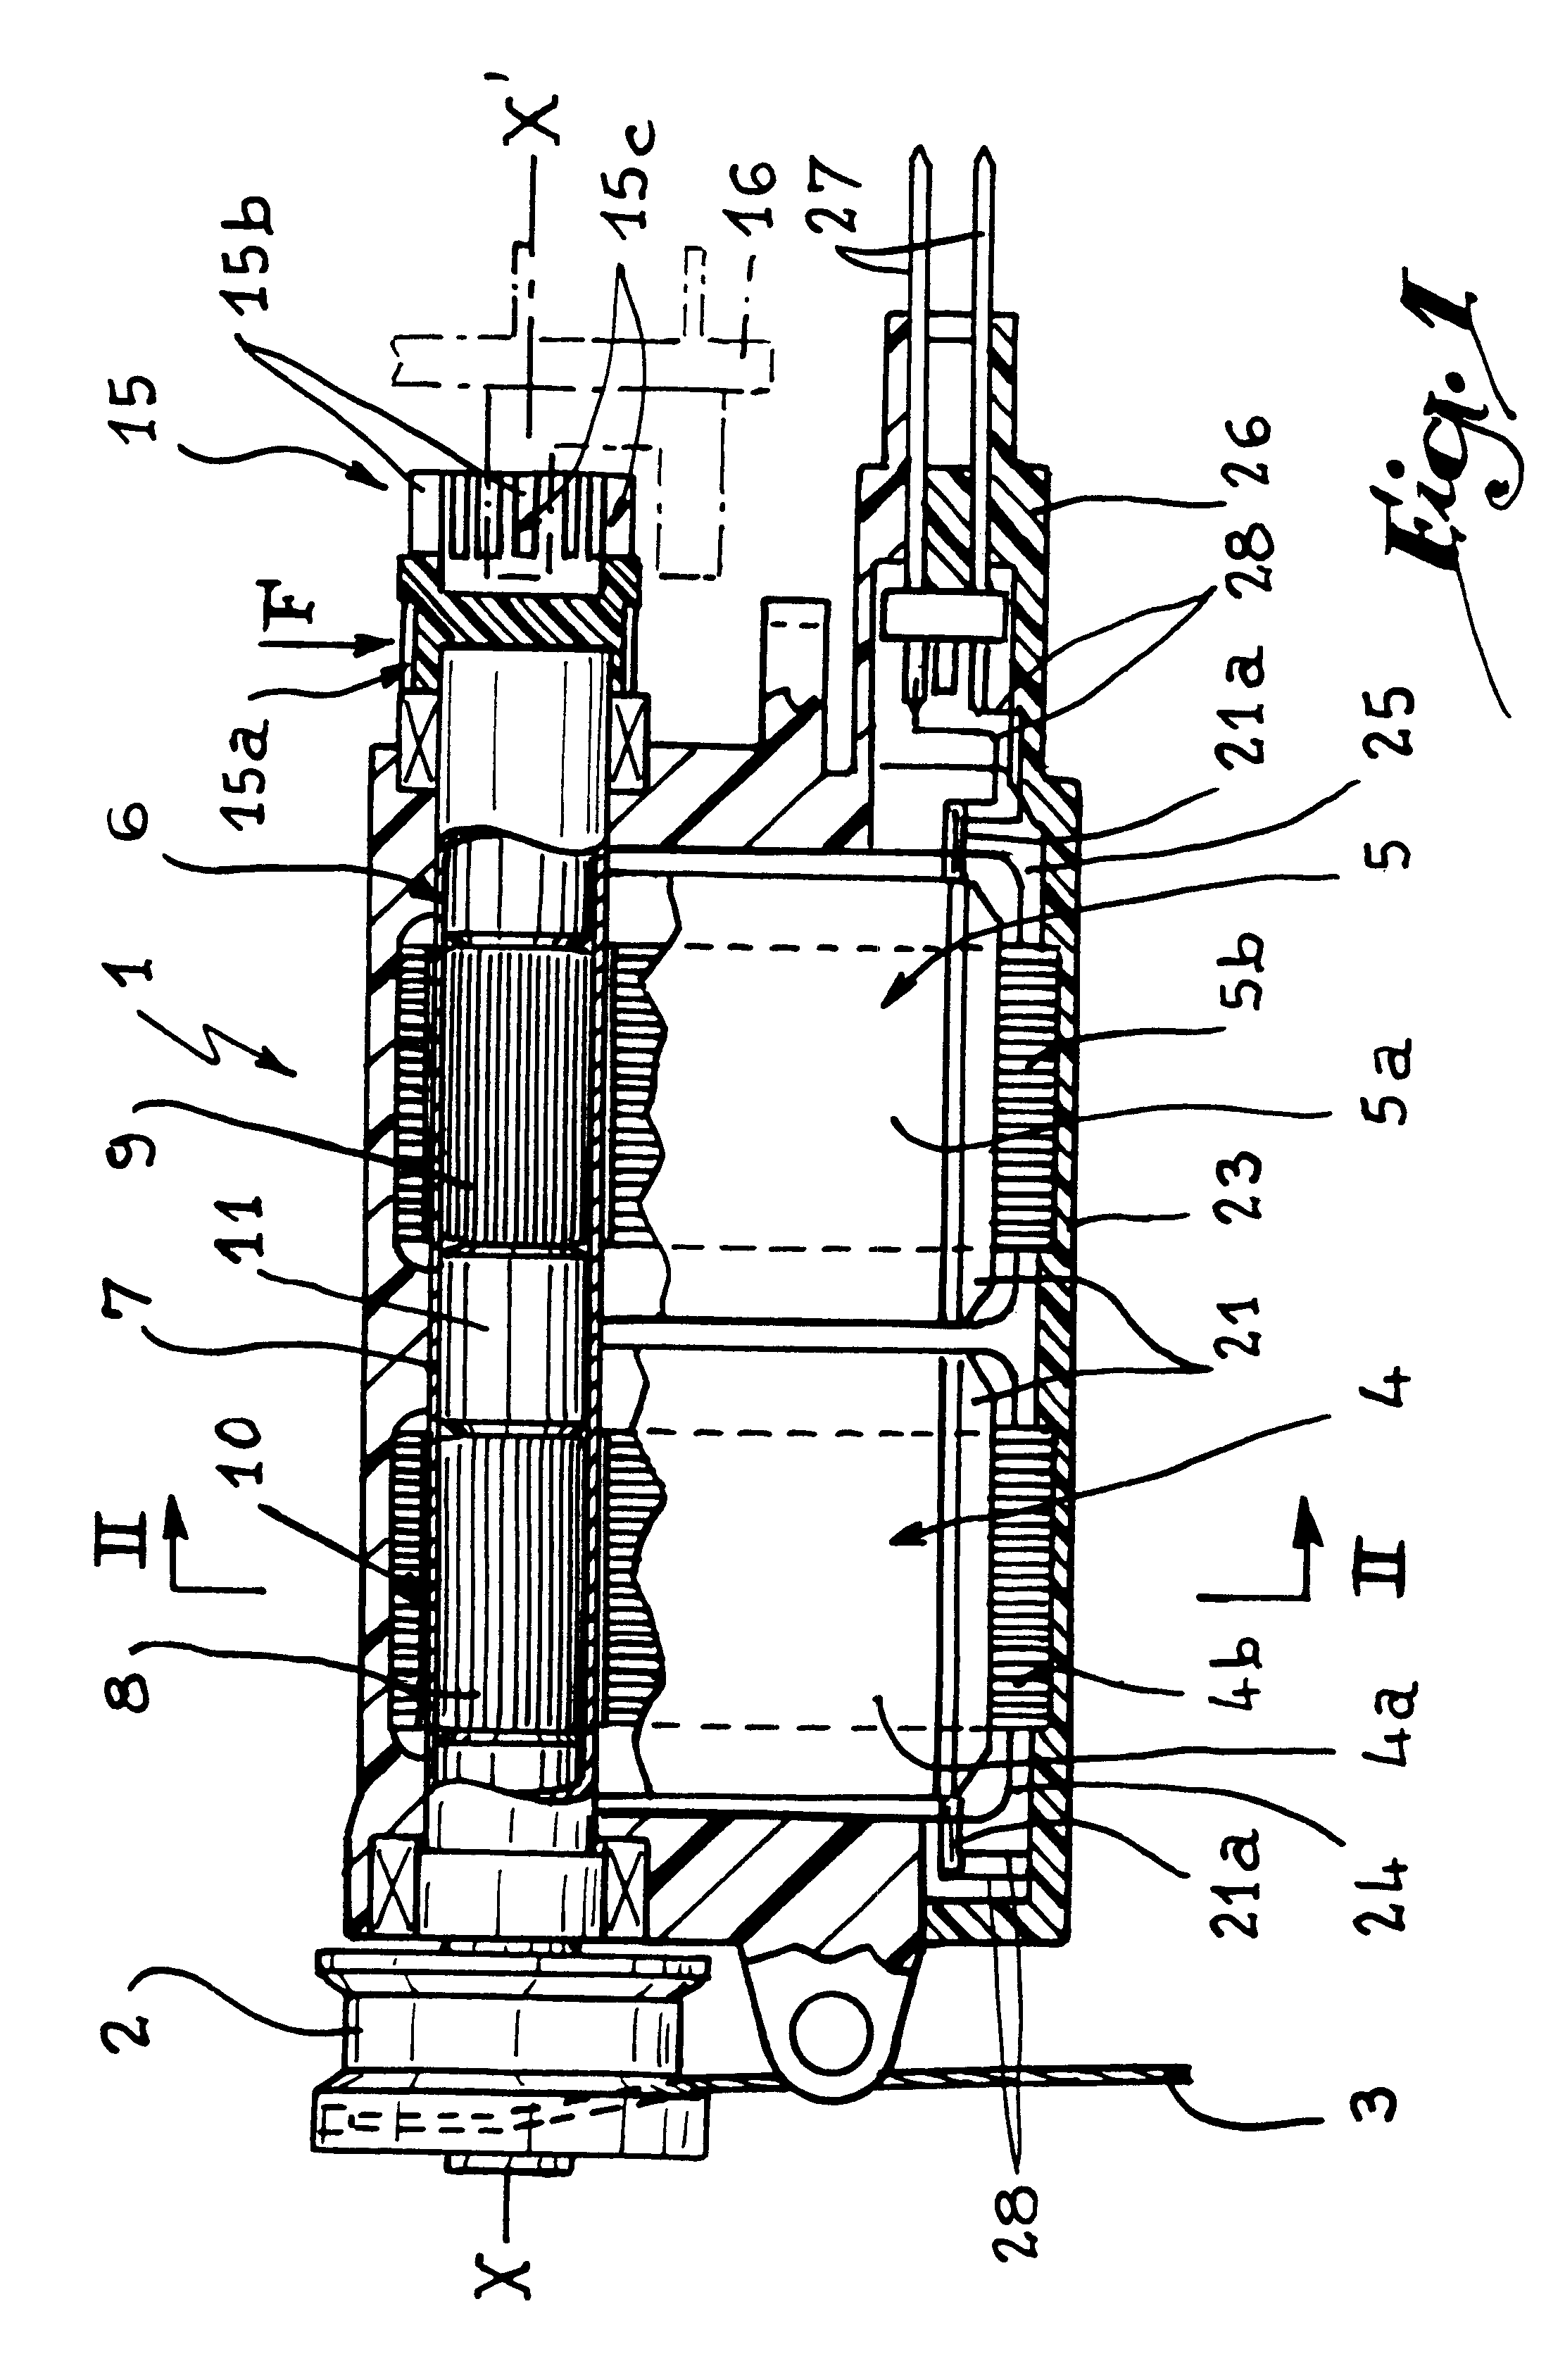 Electrical rotating actuator for forming a shed in a weaving loom